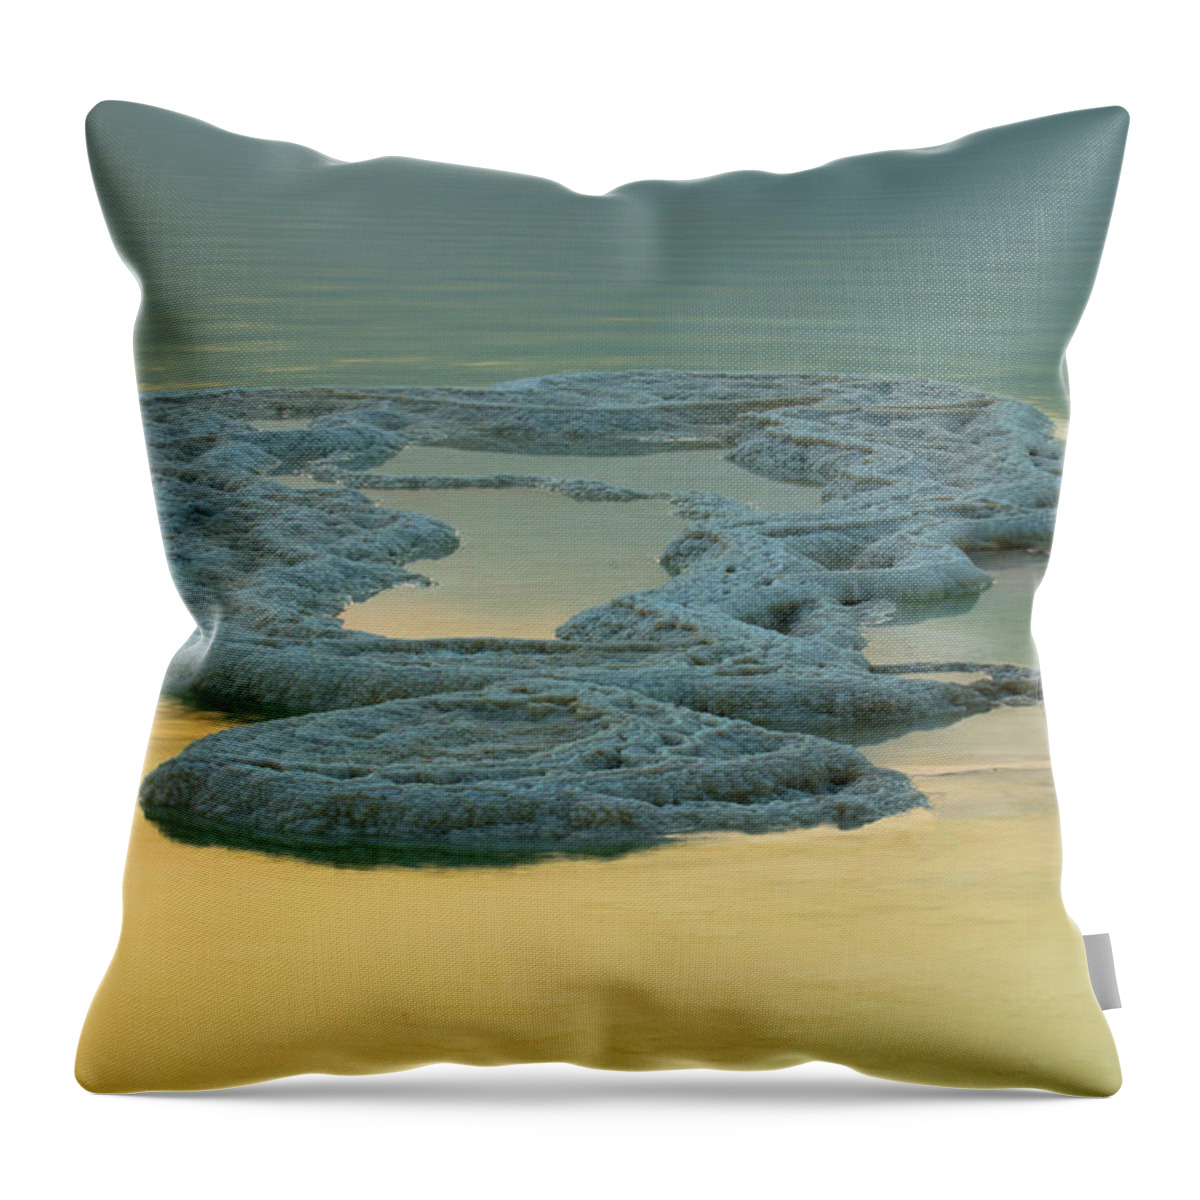 Tranquility Throw Pillow featuring the photograph Salt Island by Ilan Shacham